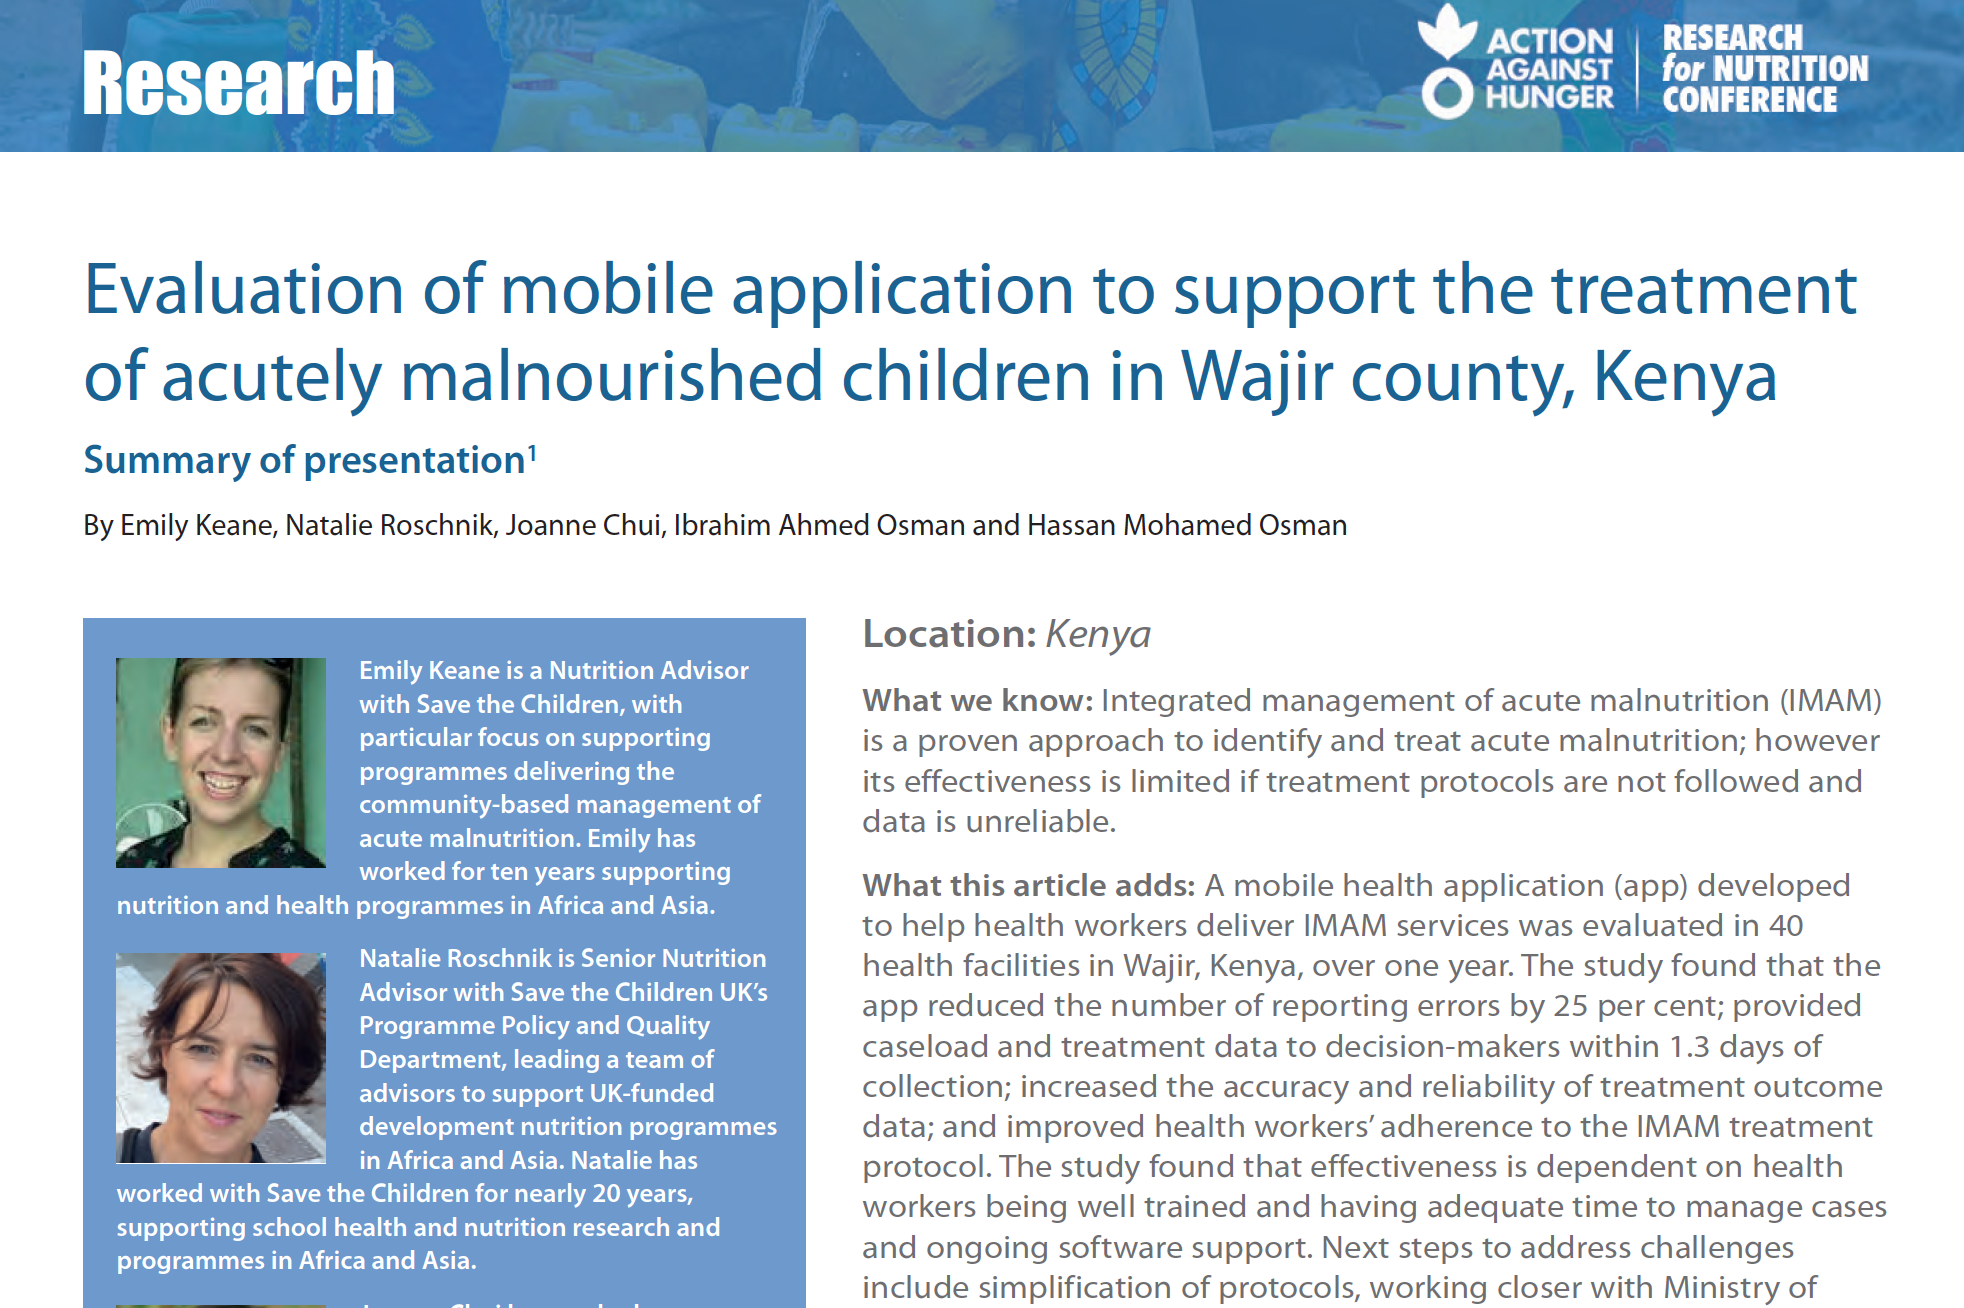 Photo: Action Against Hunger_Summary of Research Presentation_IMAM Mobile App in Kenya